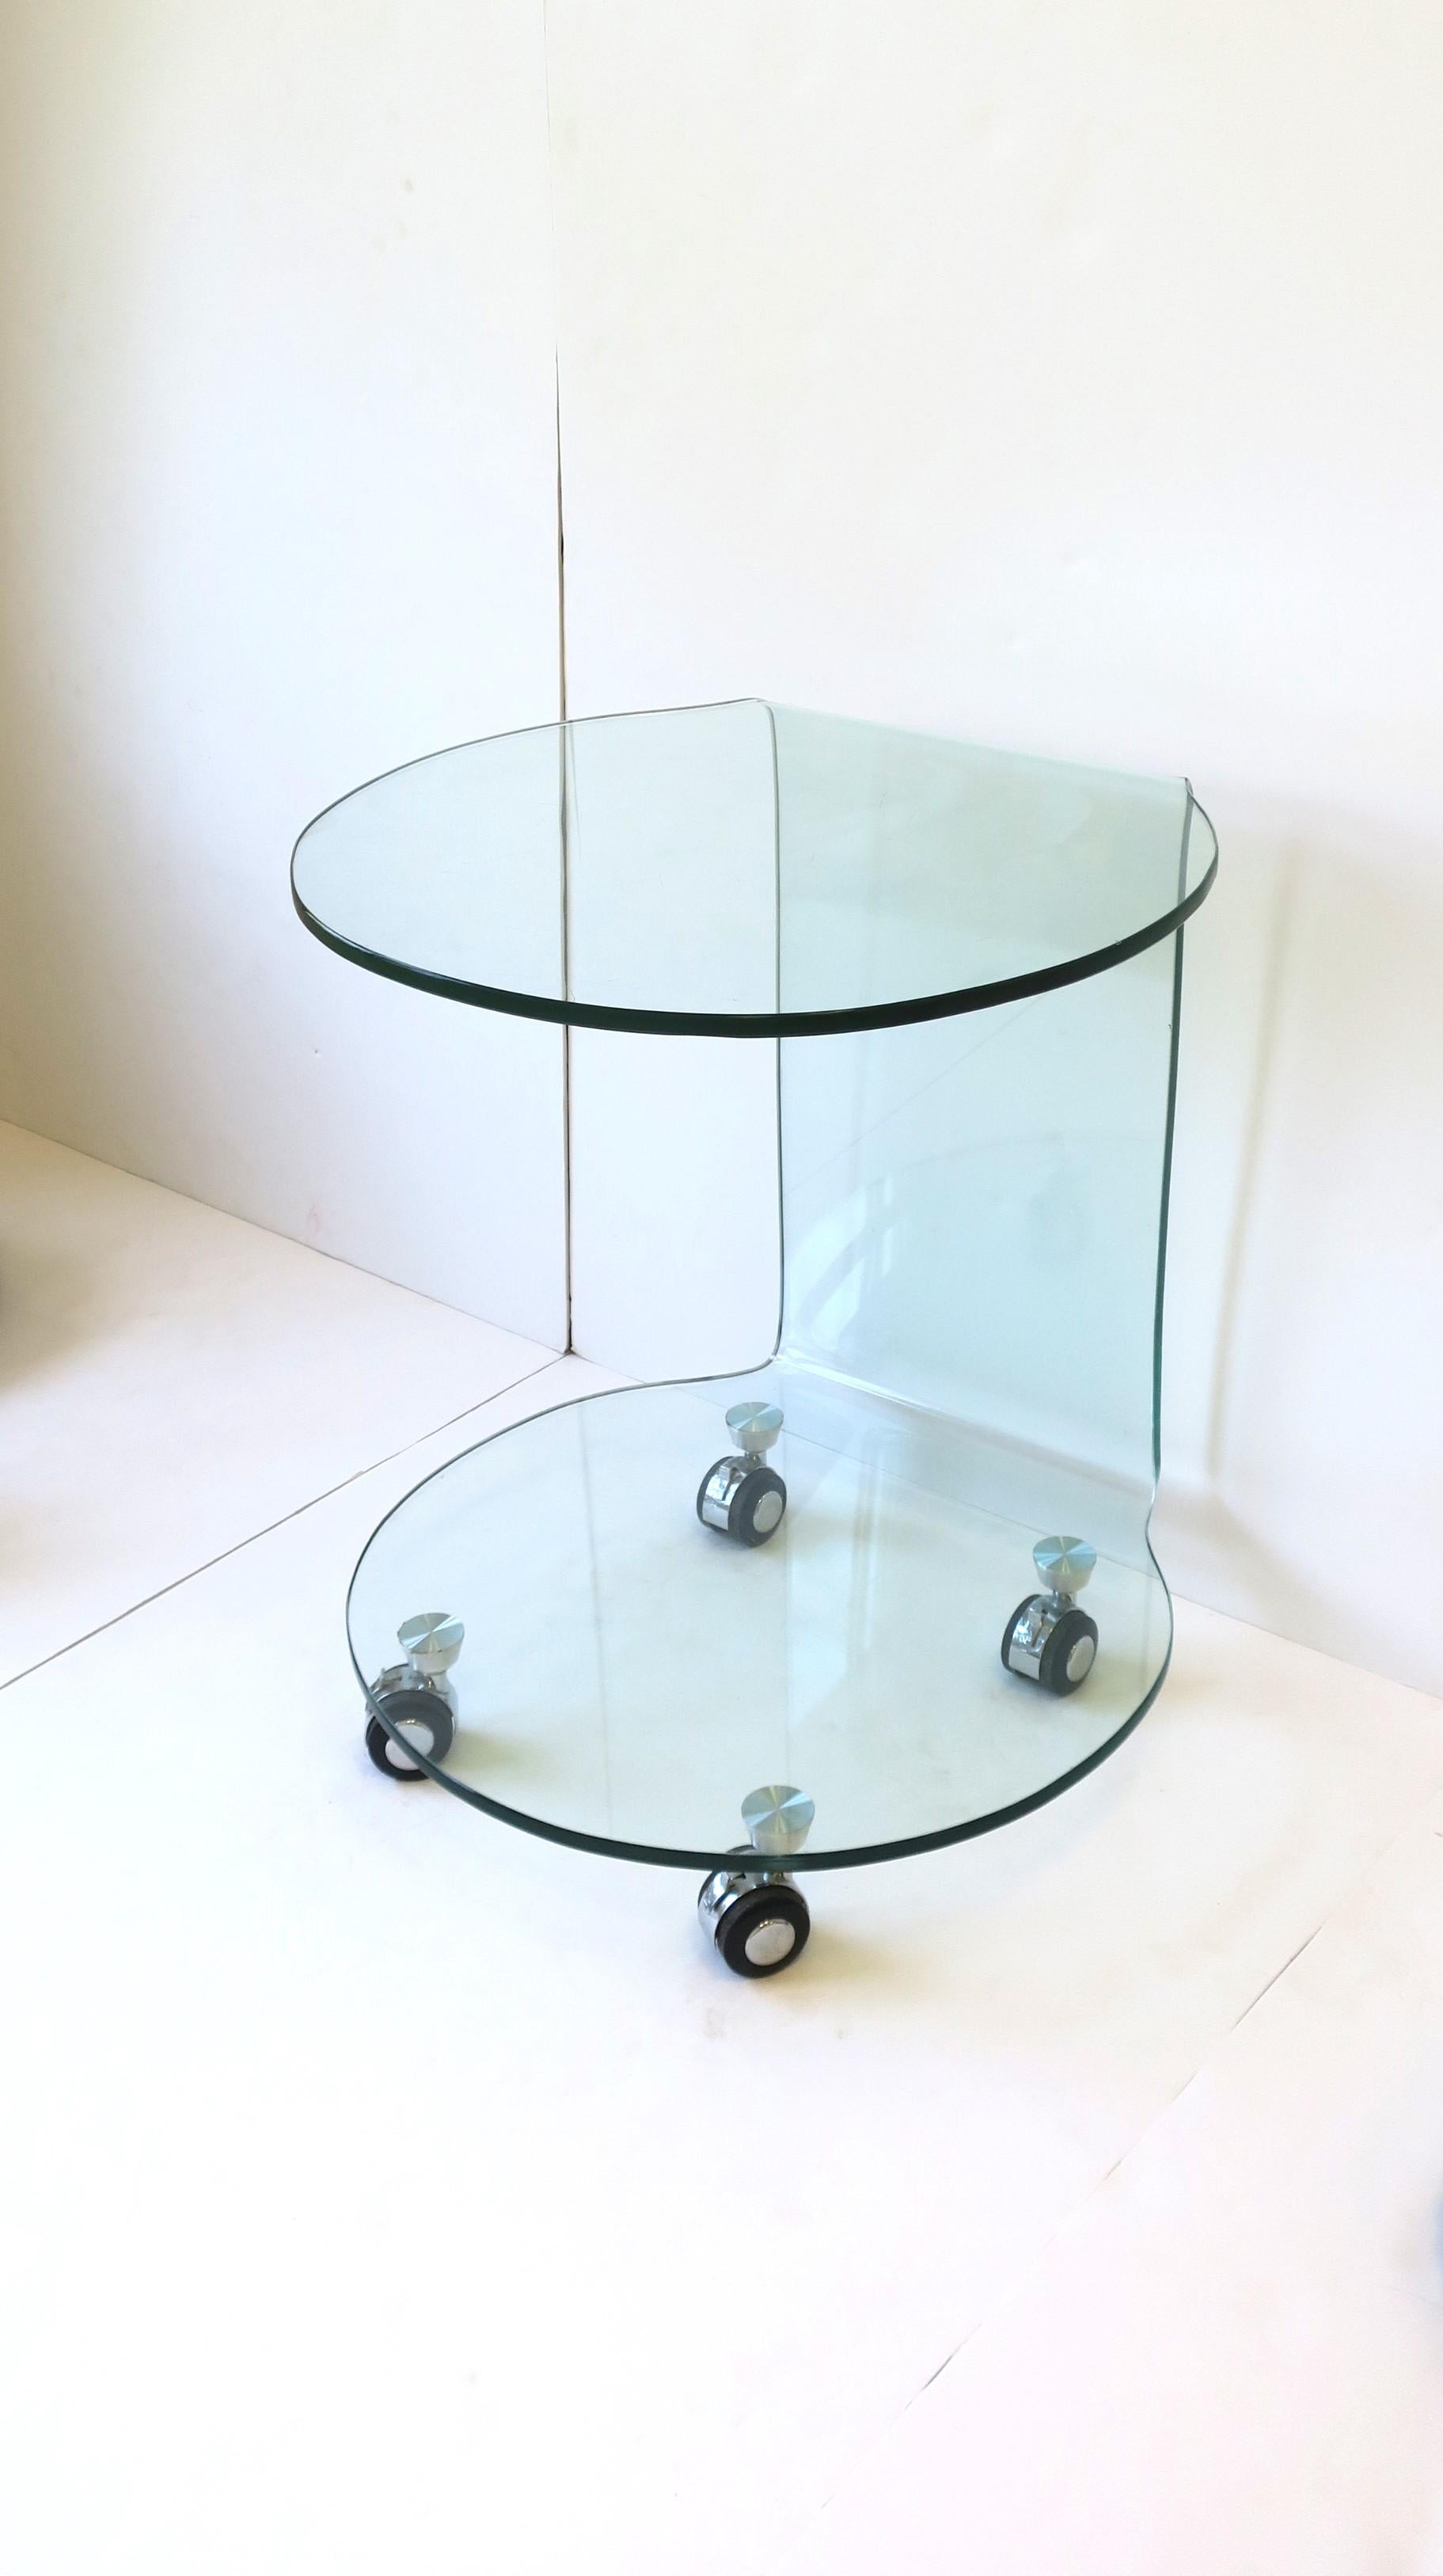 A Postmodern bent glass side or end table in the style of Italian design house Fiam, circa late 20th century. A substantial all glass, bent glass, side or drinks table, with lower shelf and caster wheels at base. Wheels do effectively roll, or